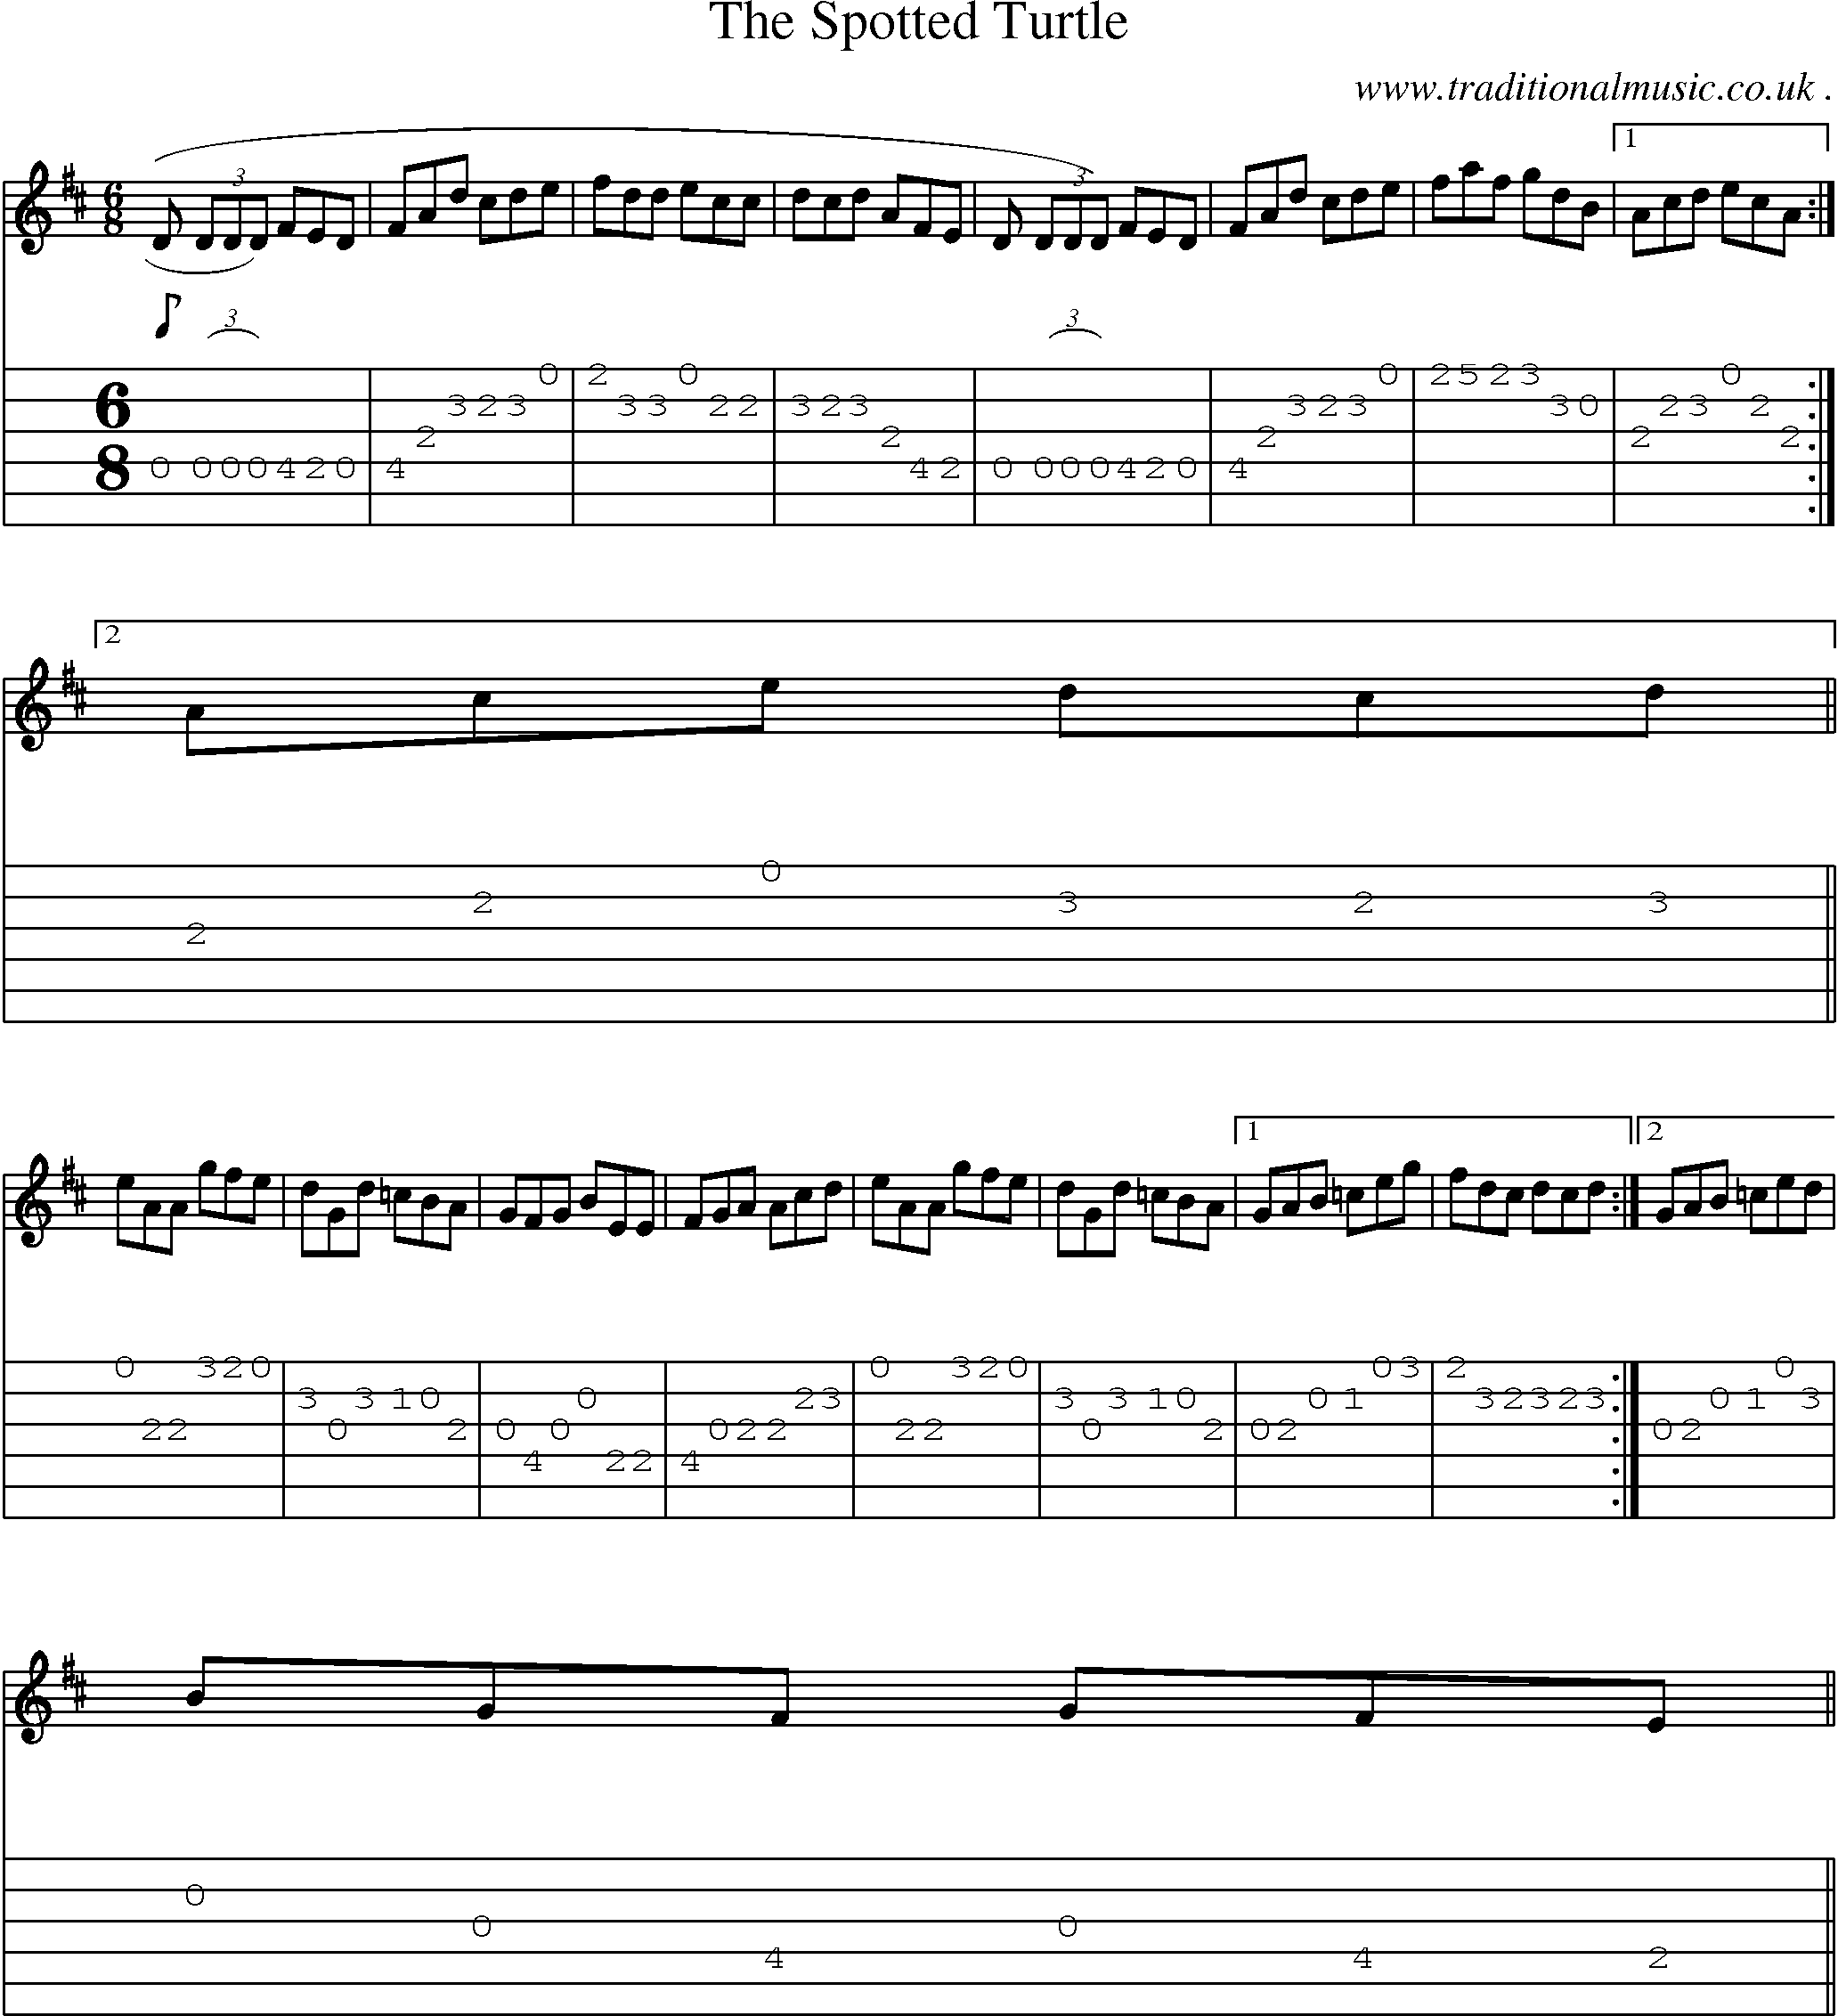 Sheet-Music and Guitar Tabs for The Spotted Turtle